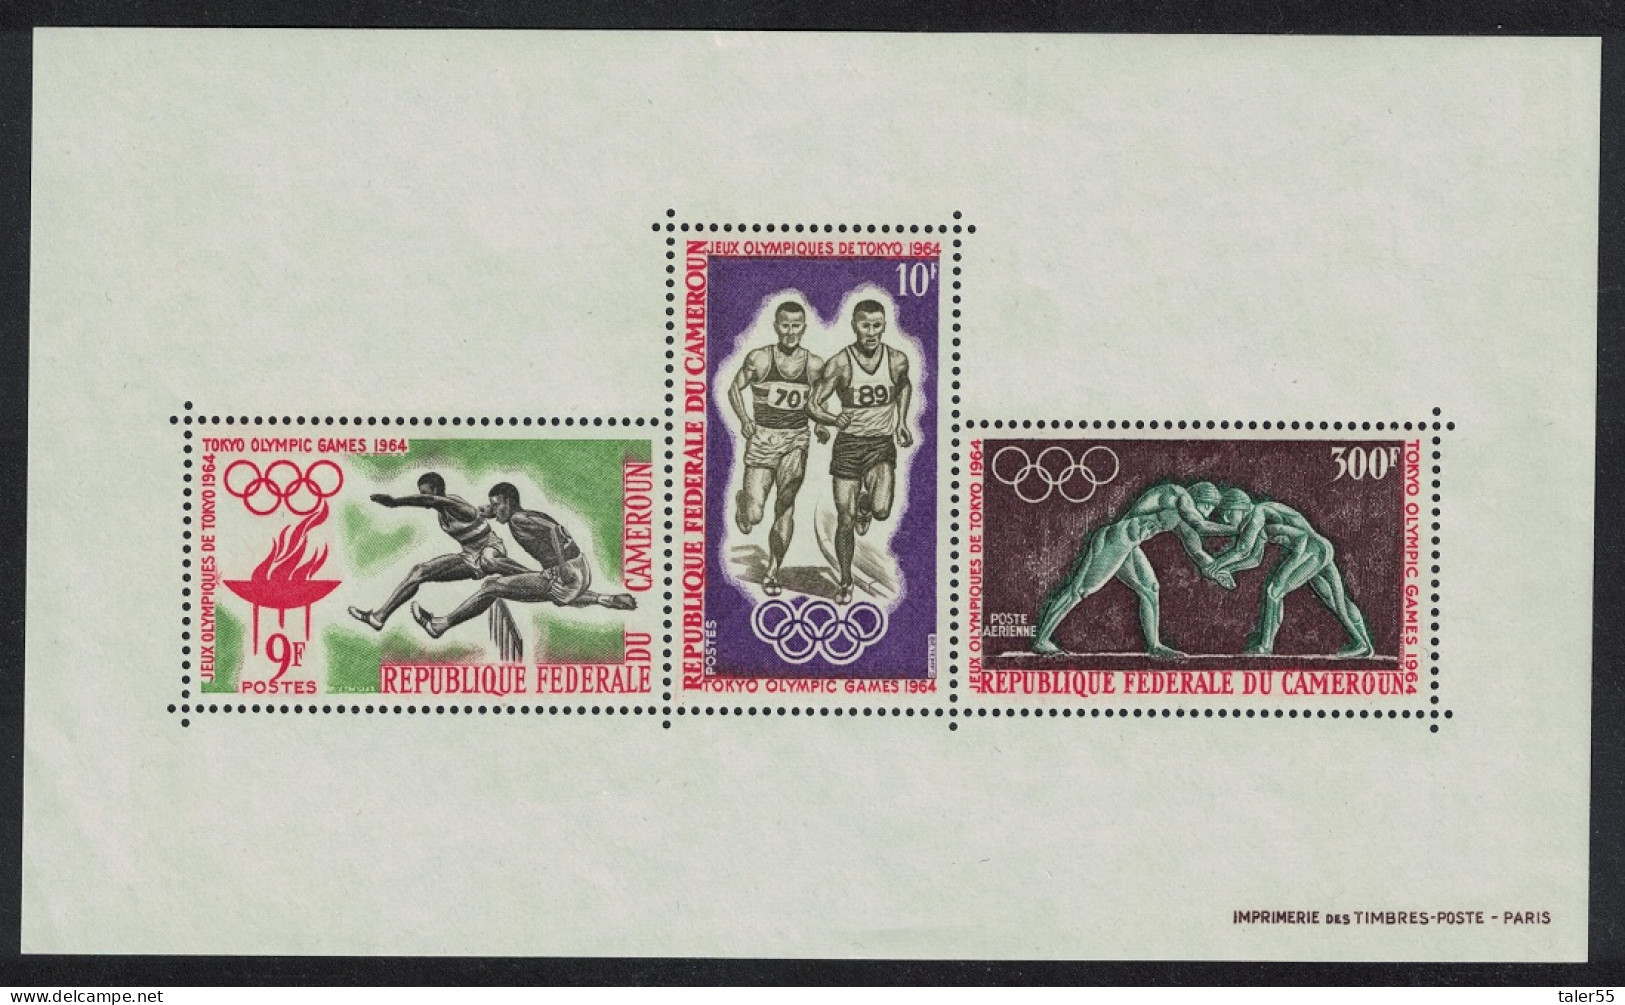 Cameroun Wrestling Running Olympic Games Tokyo MS 1964 MNH SG#MS366a - Camerún (1960-...)